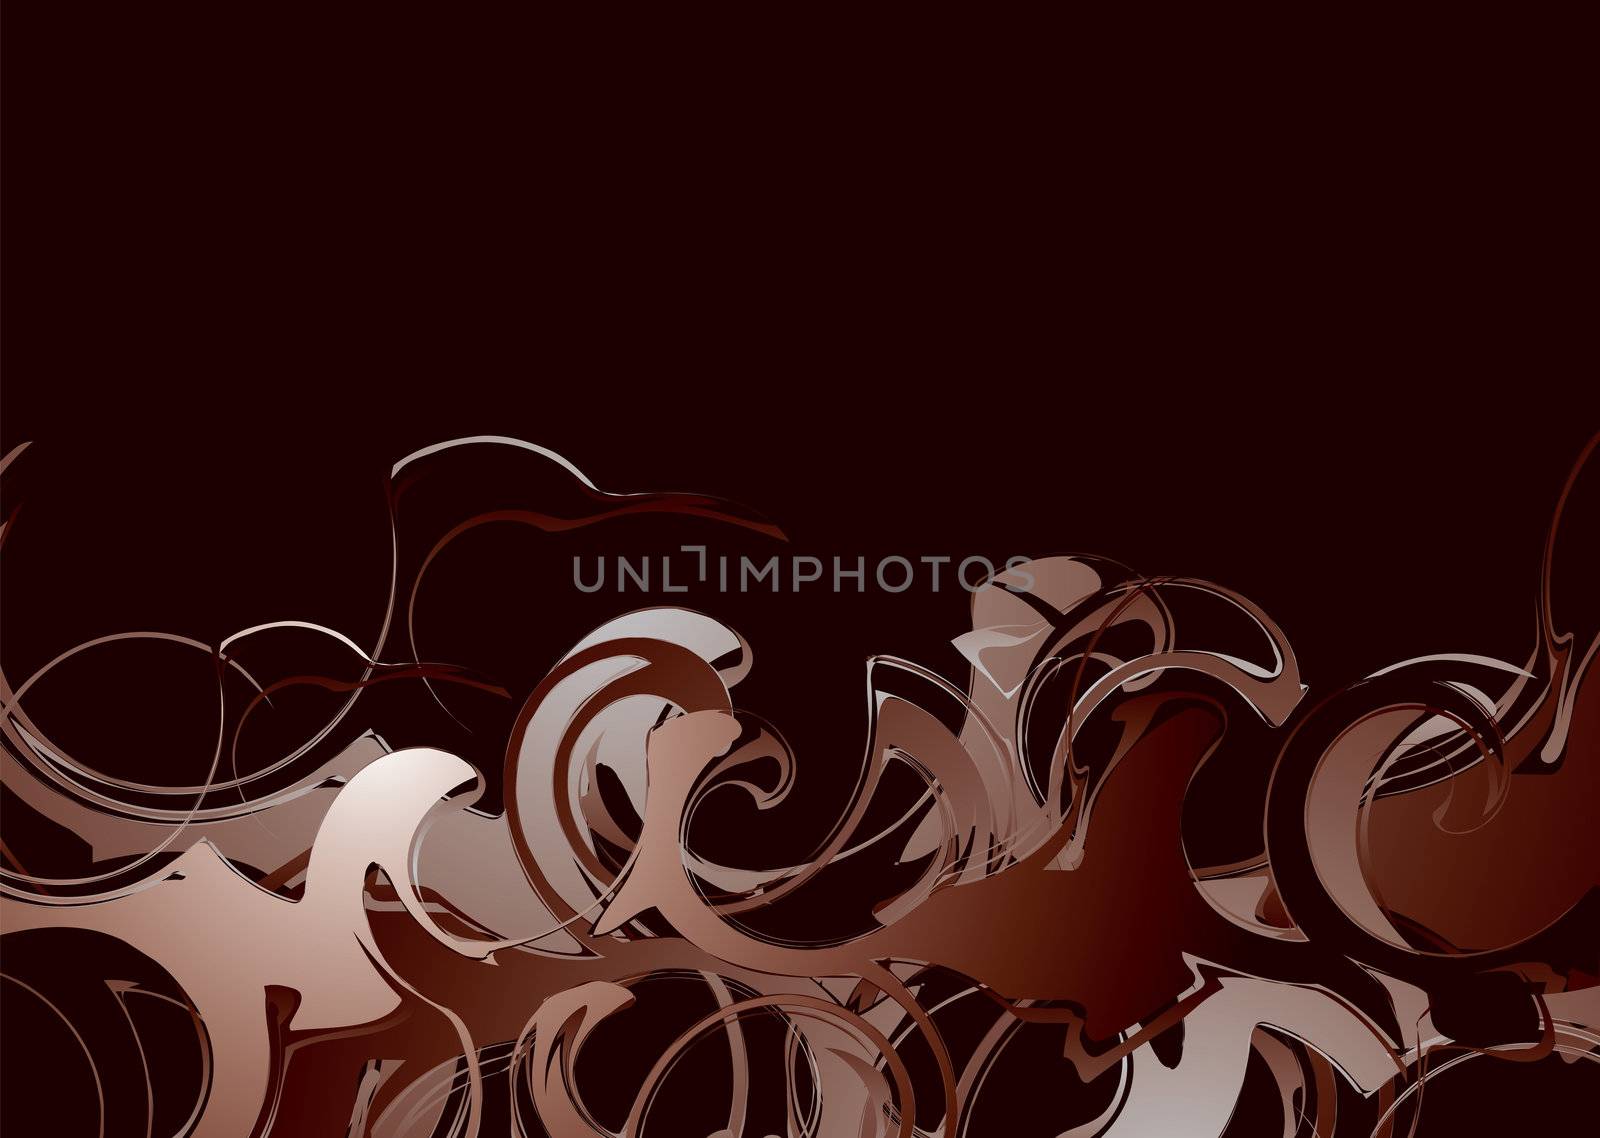 Abstract background with a smoke design in black and red